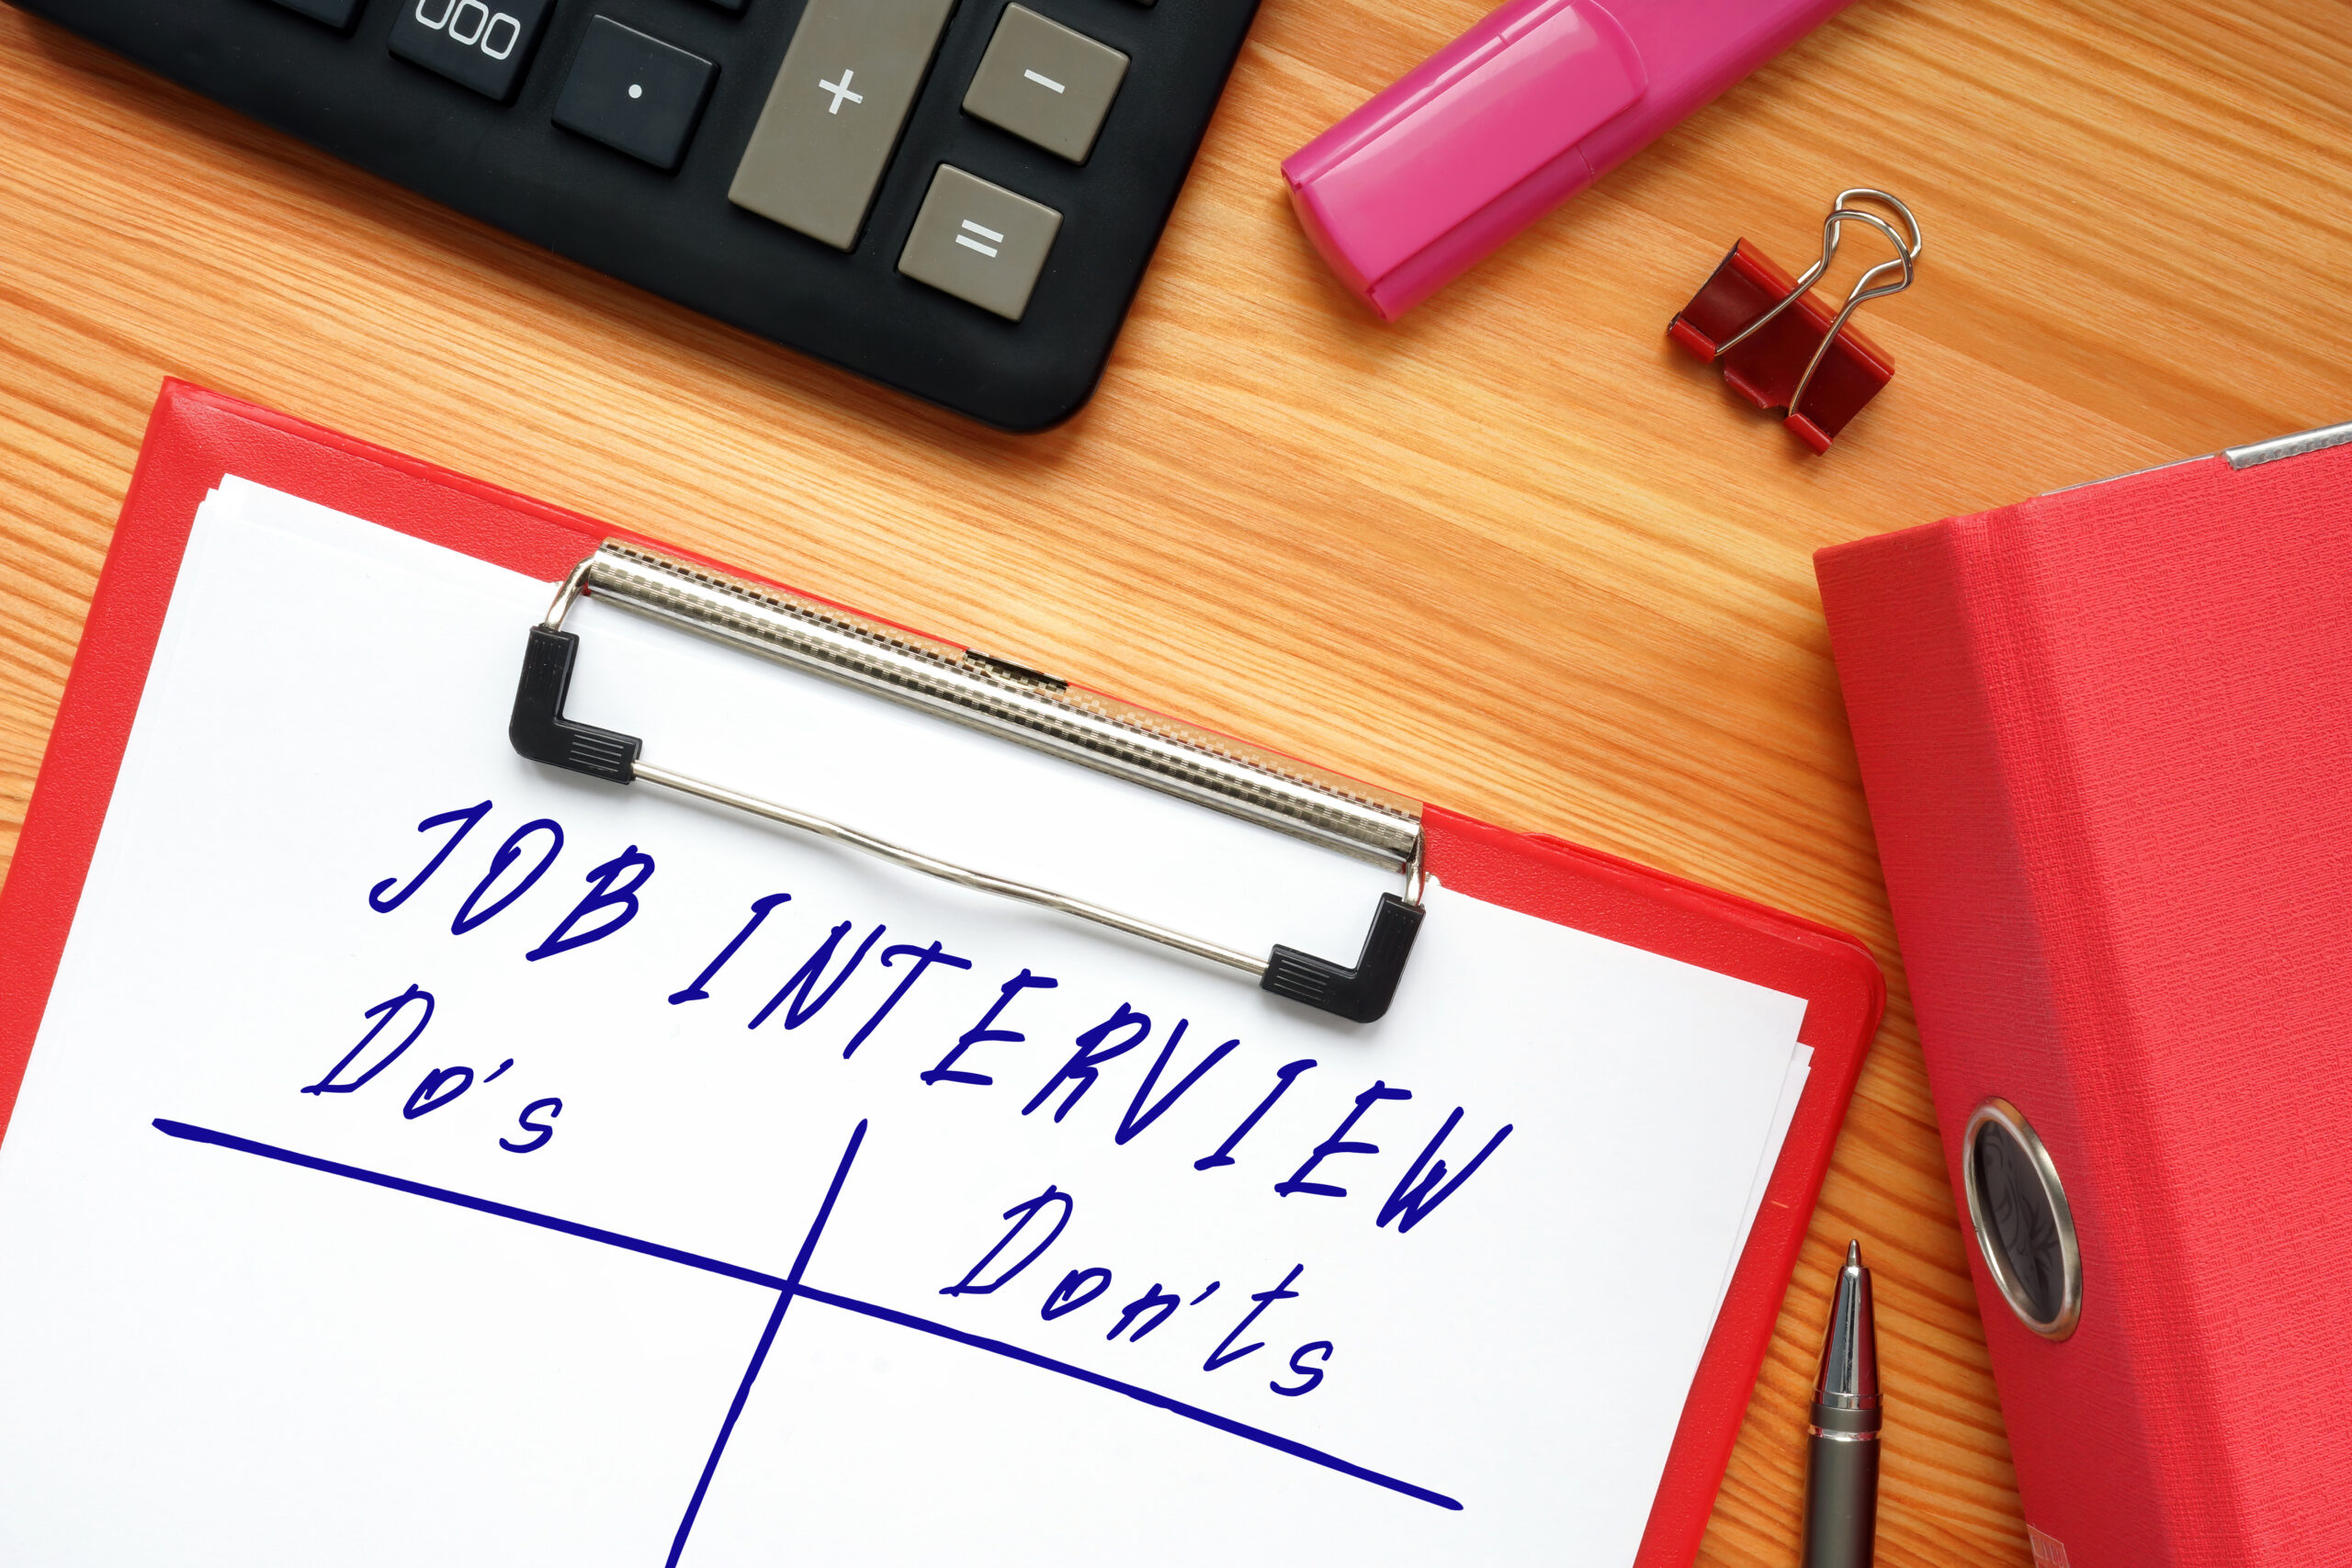 ServiceNow interview tips